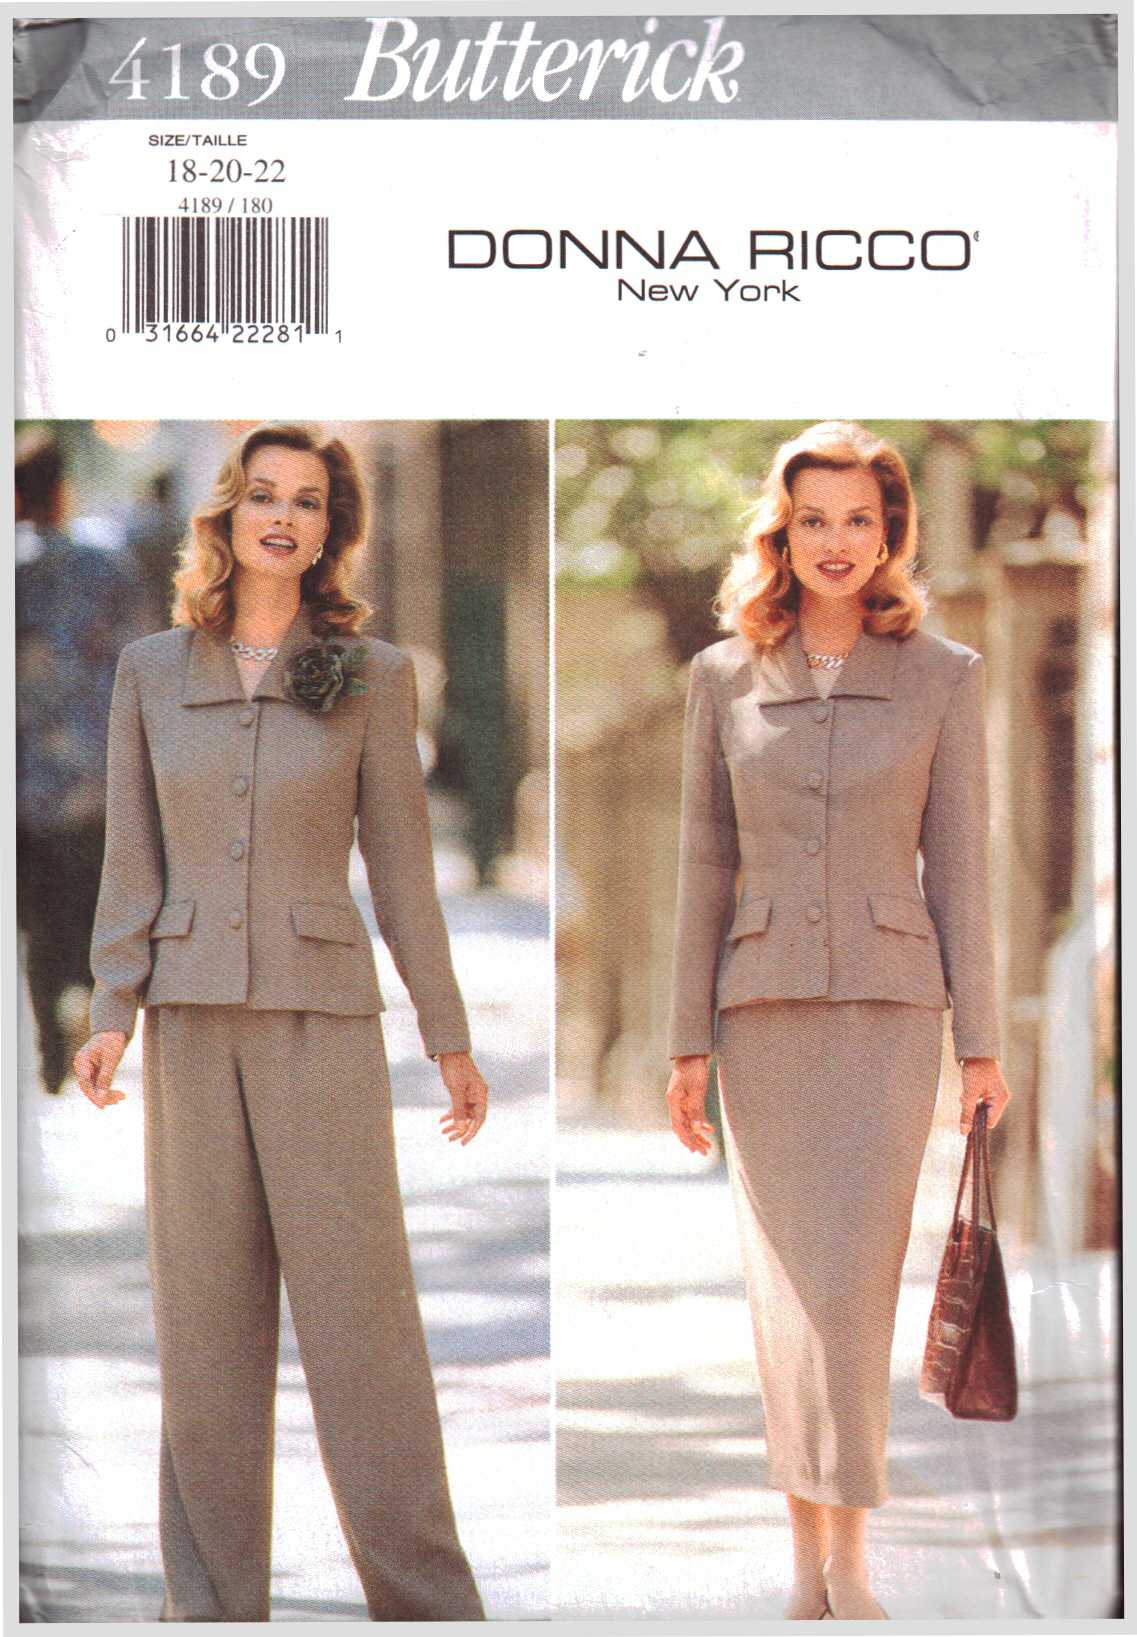 Butterick 4189 Suit - Tops, Skirts, Pants by Donna Ricco Size: 18-20-22 or  12-14-16 Uncut Sewing Pattern